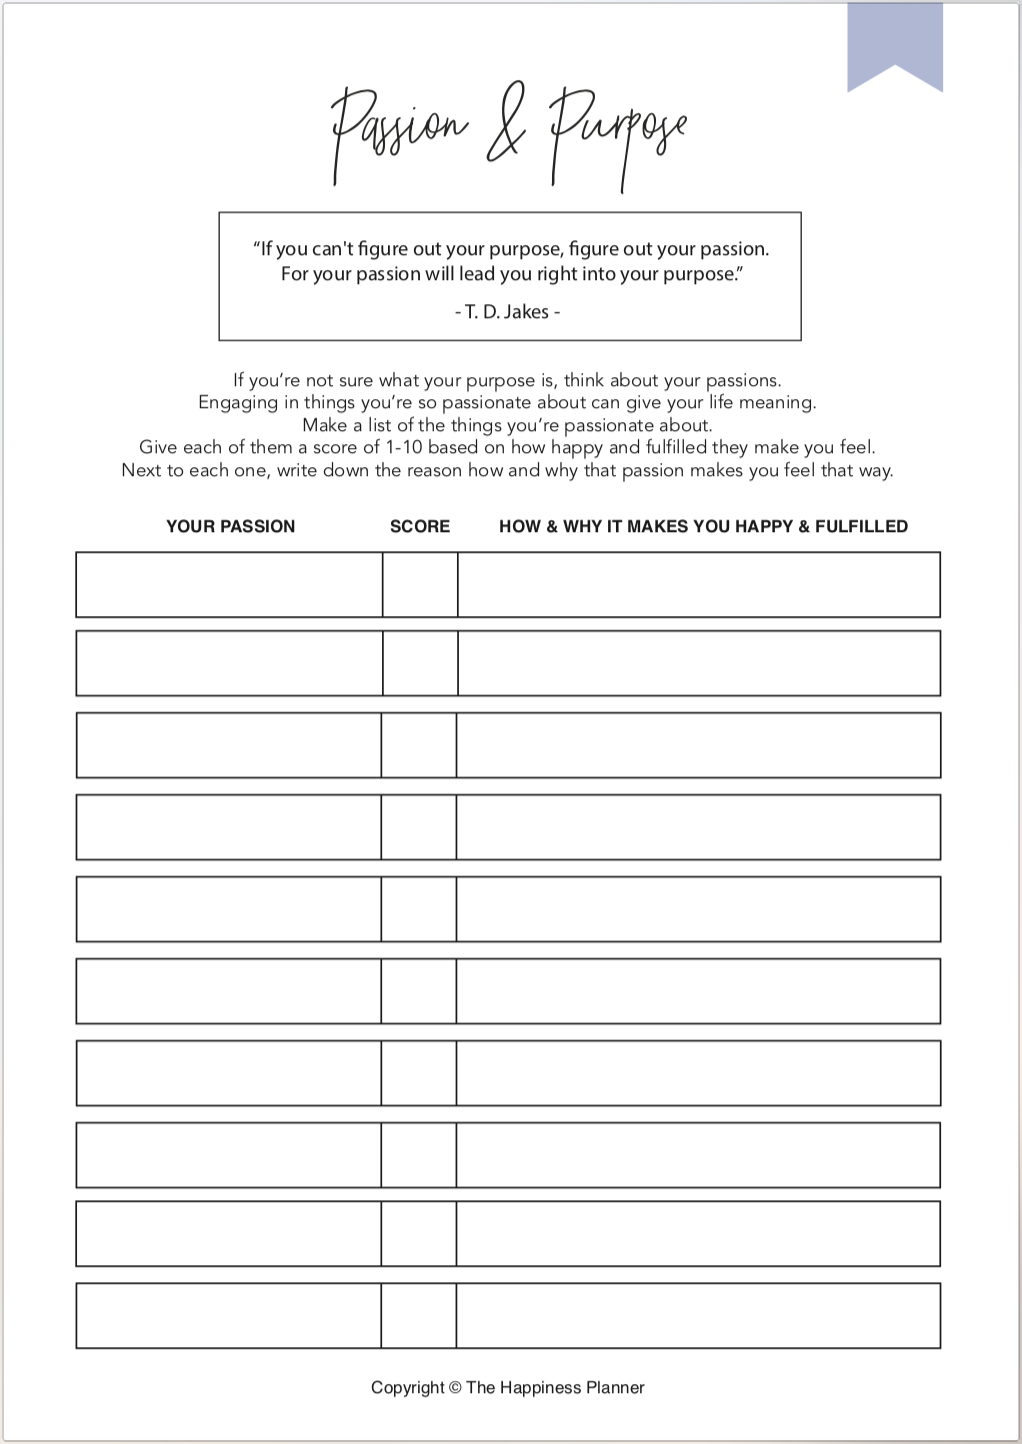 Printables: #Purpose - The Happiness Planner®